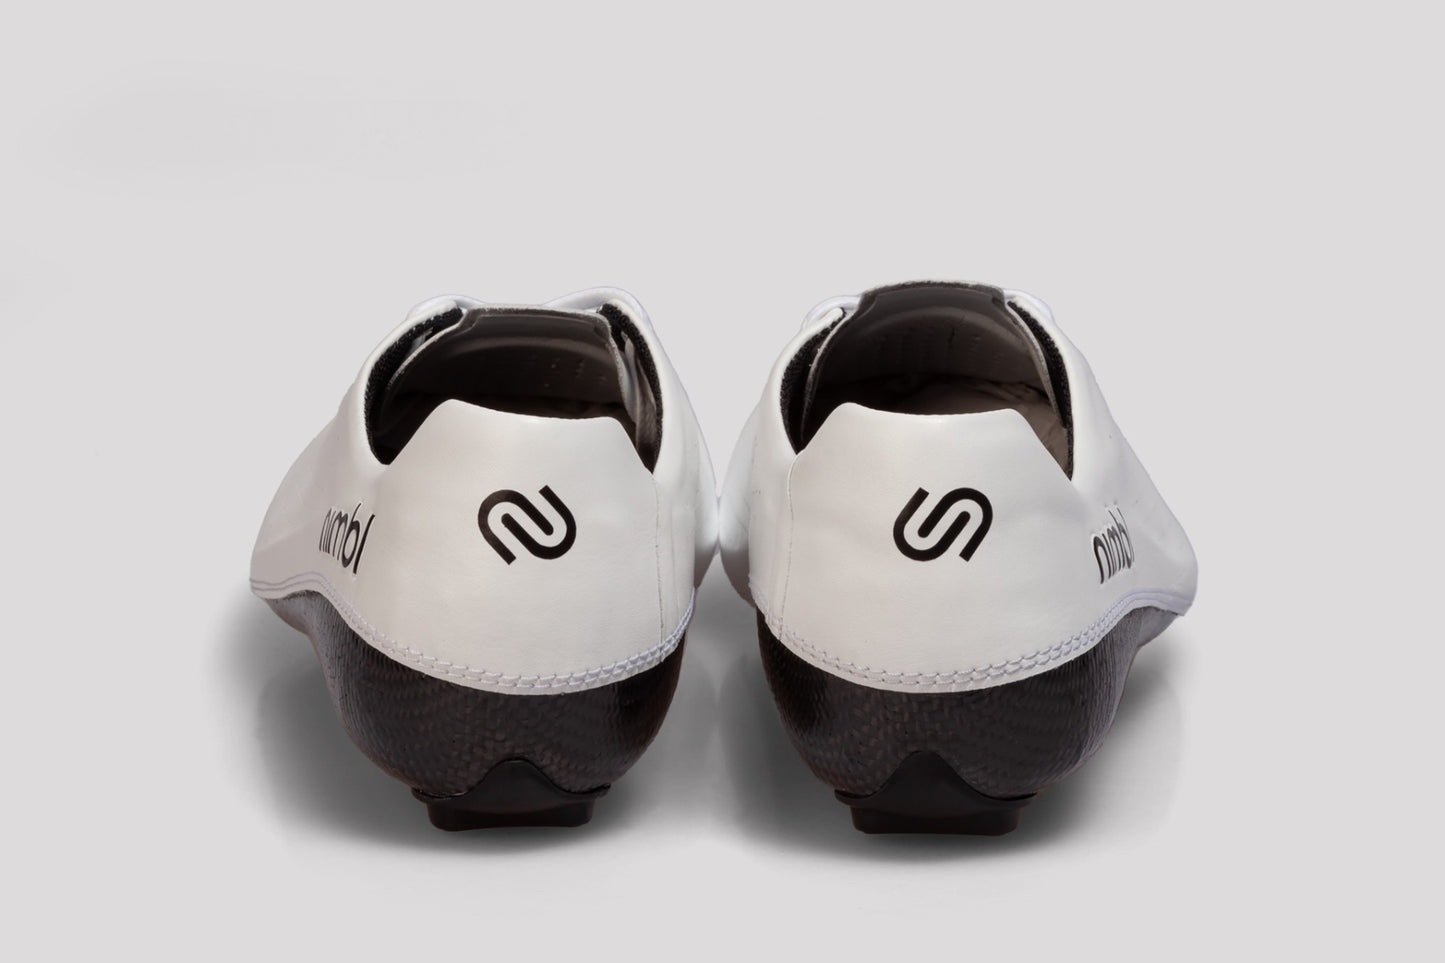 NIMBL Air Ultimate Cycling Shoes - White